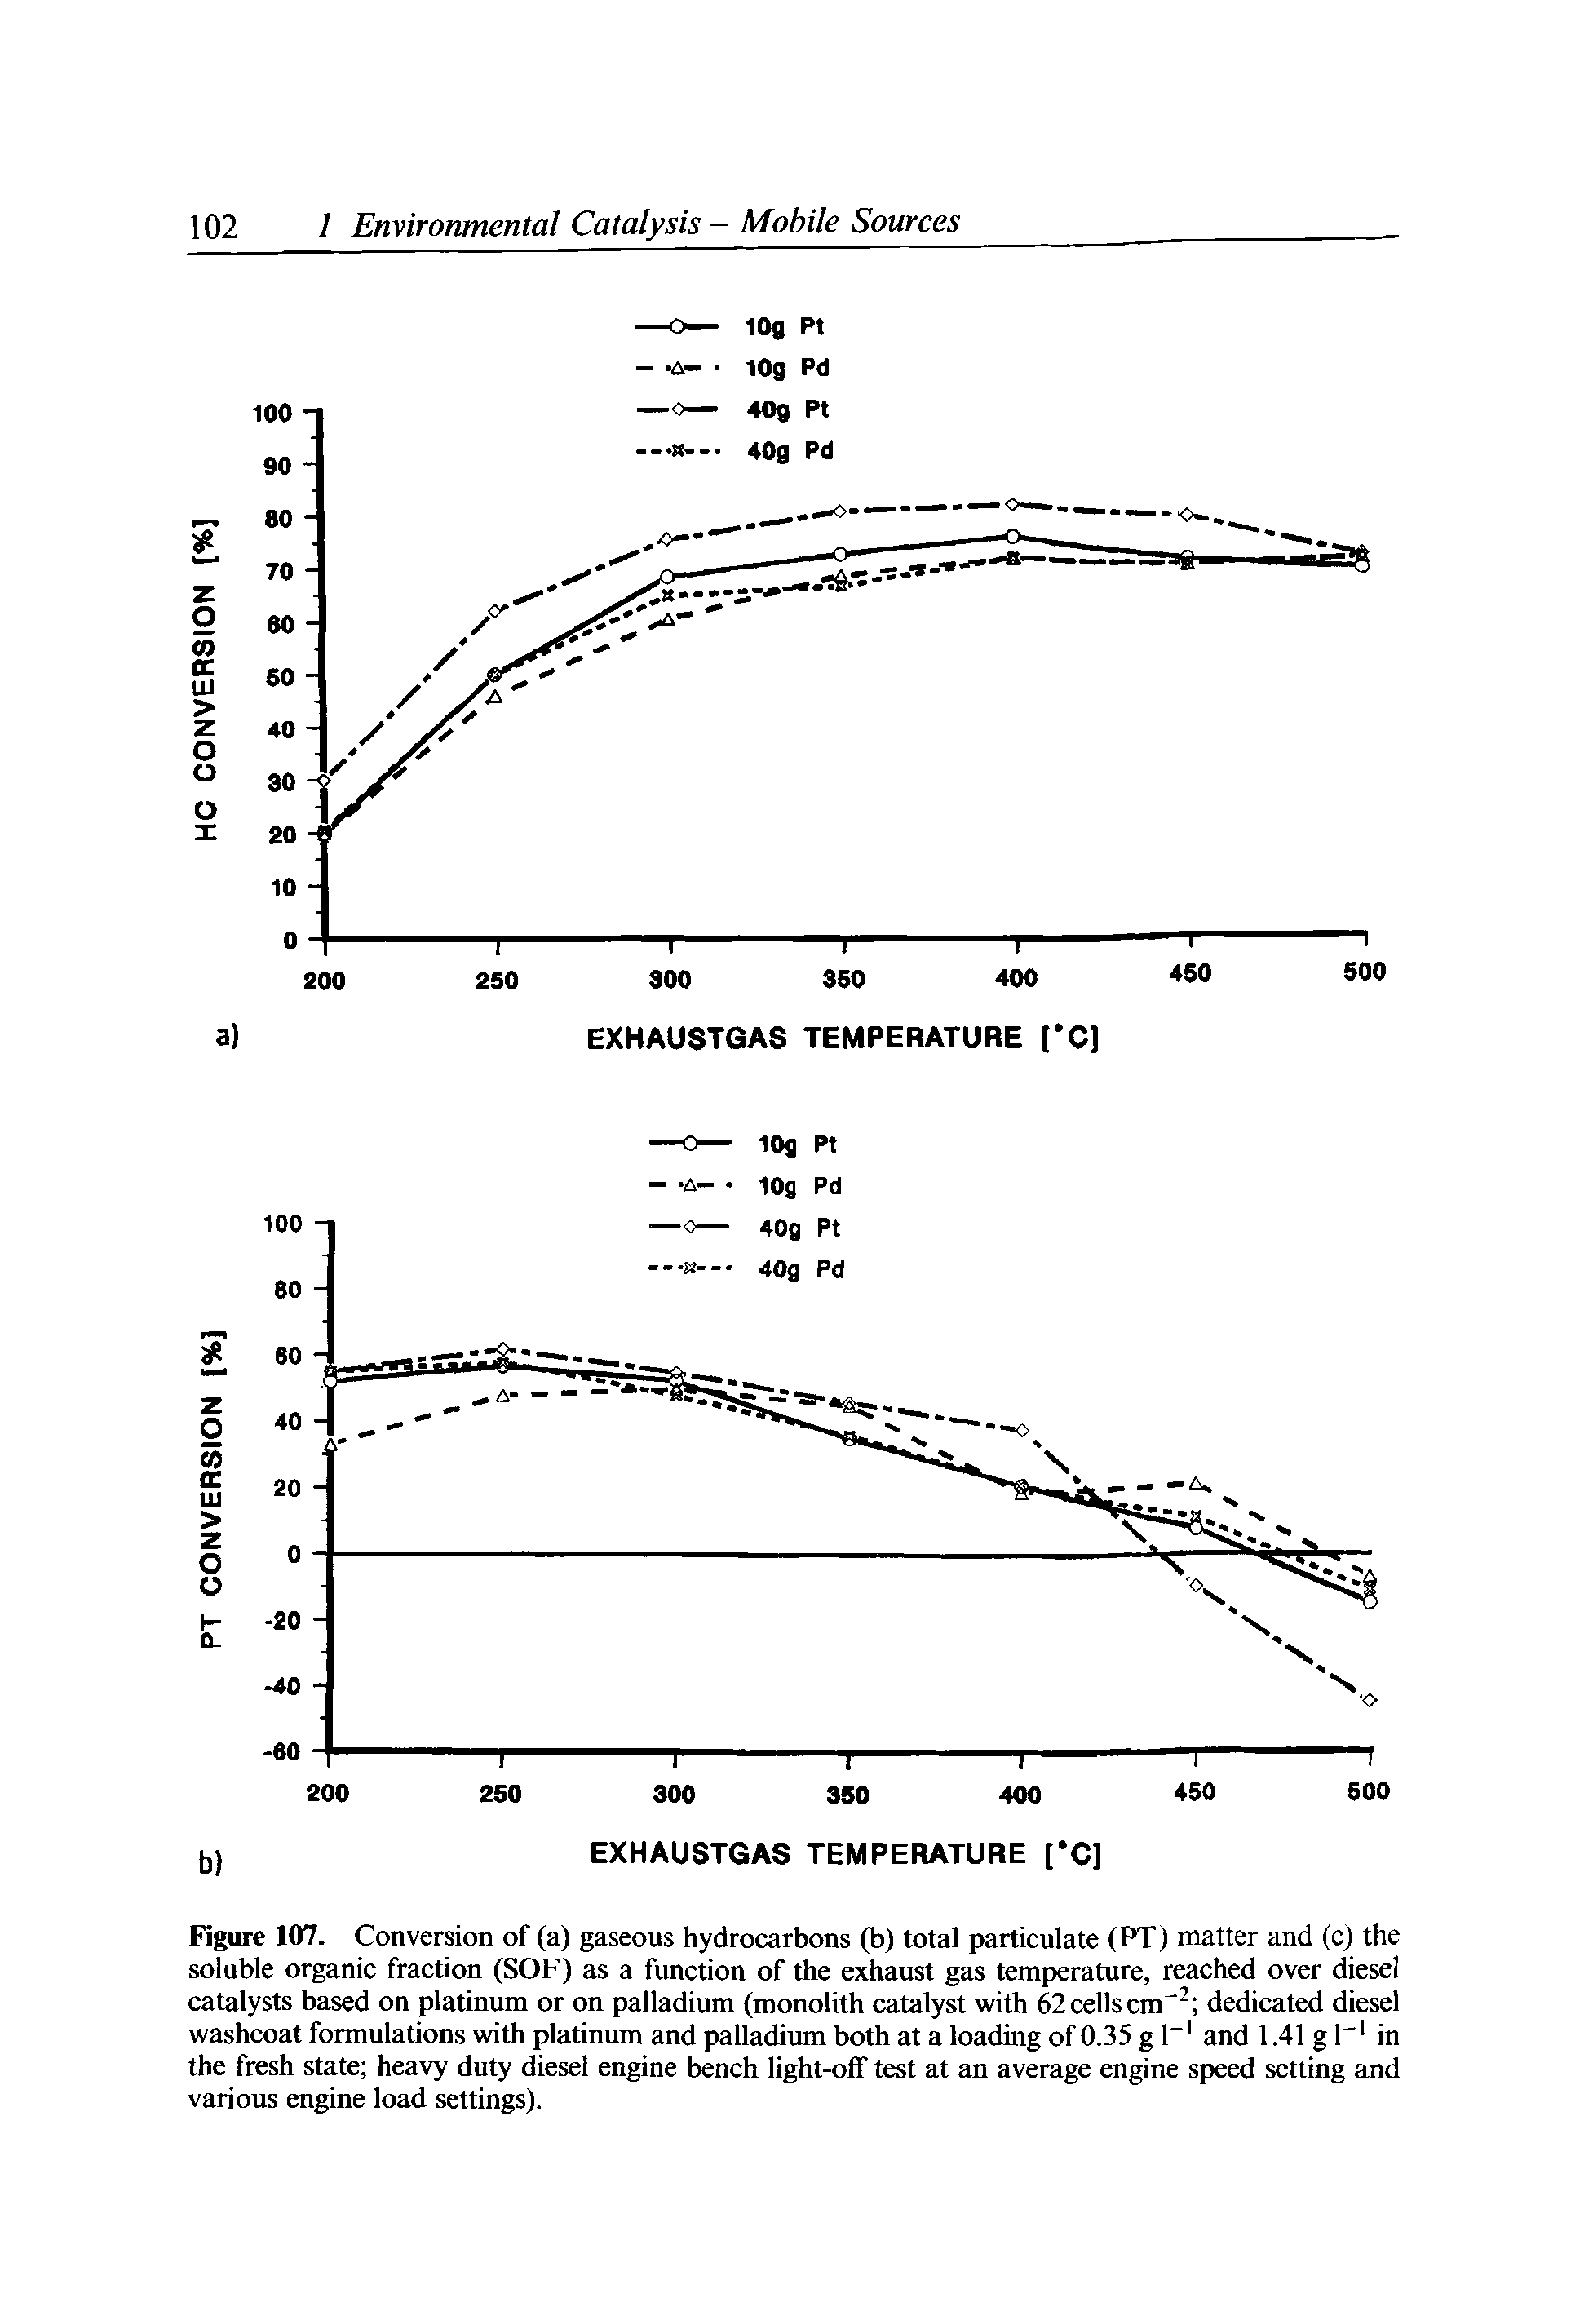 Figure 107. Conversion of (a) gaseous hydrocarbons (b) total particulate (PT) matter and (c) the soluble organic fraction (SOF) as a function of the exhaust gas temperature, reached over diesel eatalysts based on platinum or on palladium (monolith catalyst with 62 cells cm dedicated diesel washeoat formulations with platinum and palladium both at a loading of 0.35 g 1" and 1.41 g 1" in the fresh state heavy duty diesel engine bench light-off test at an average engine speed setting and various engine load settings).